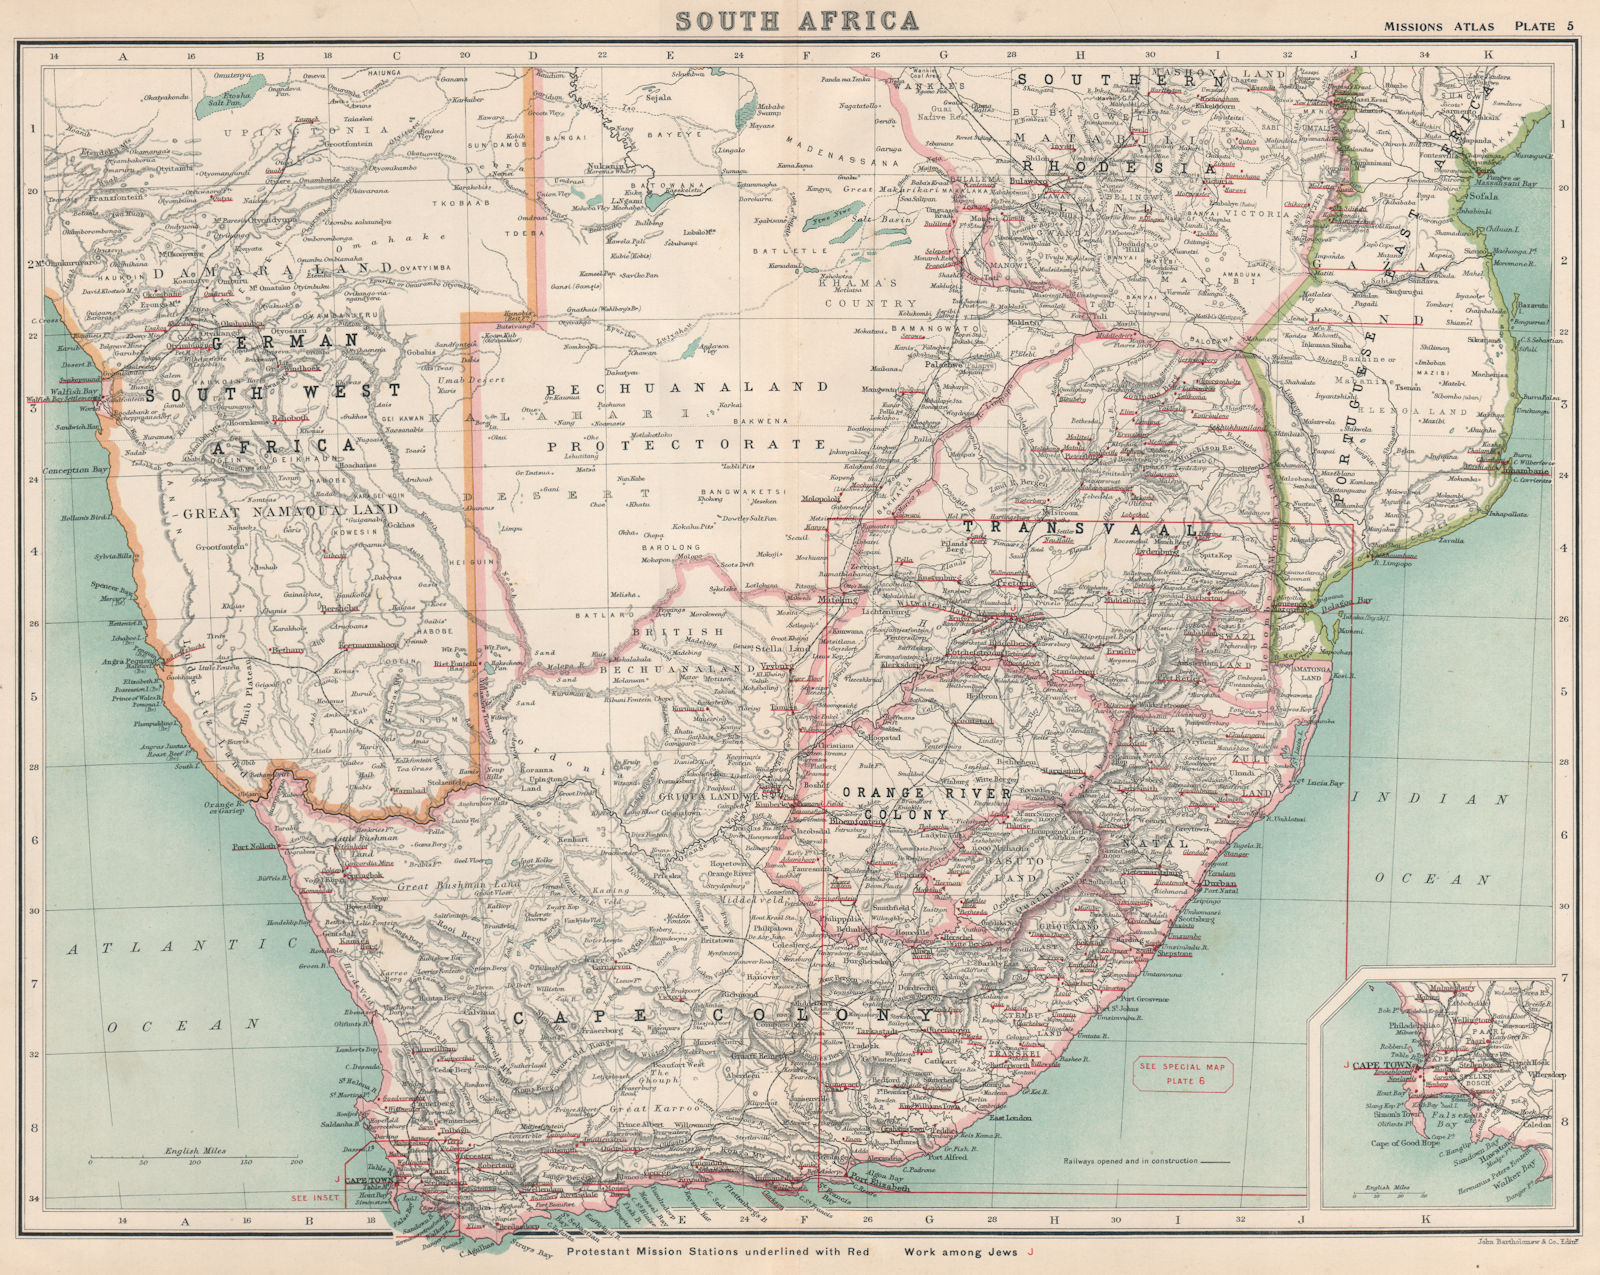 Associate Product SOUTHERN AFRICA PROTESTANT MISSIONS. Namibia Rhodesia Bechuanaland 1911 map